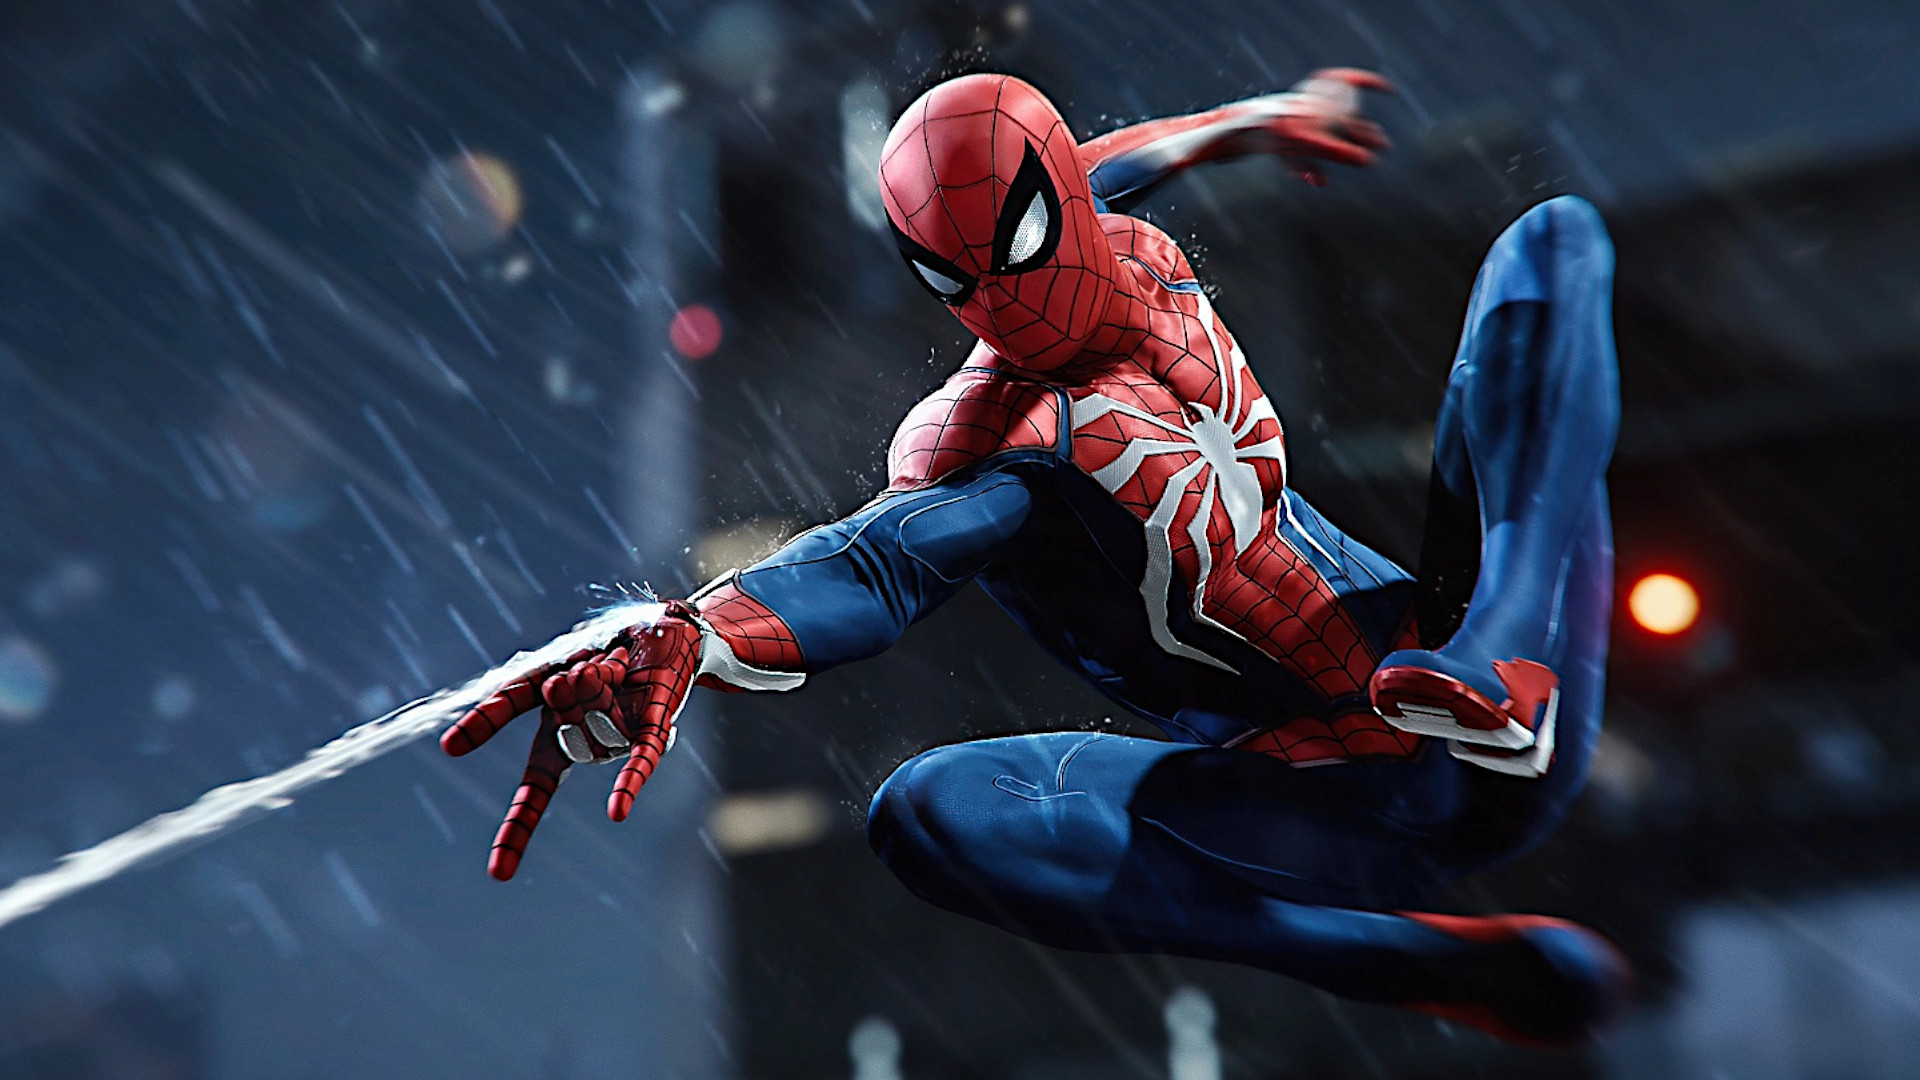 Spider-Man Remastered patch improves DLSS, FSR, and fixes bugs